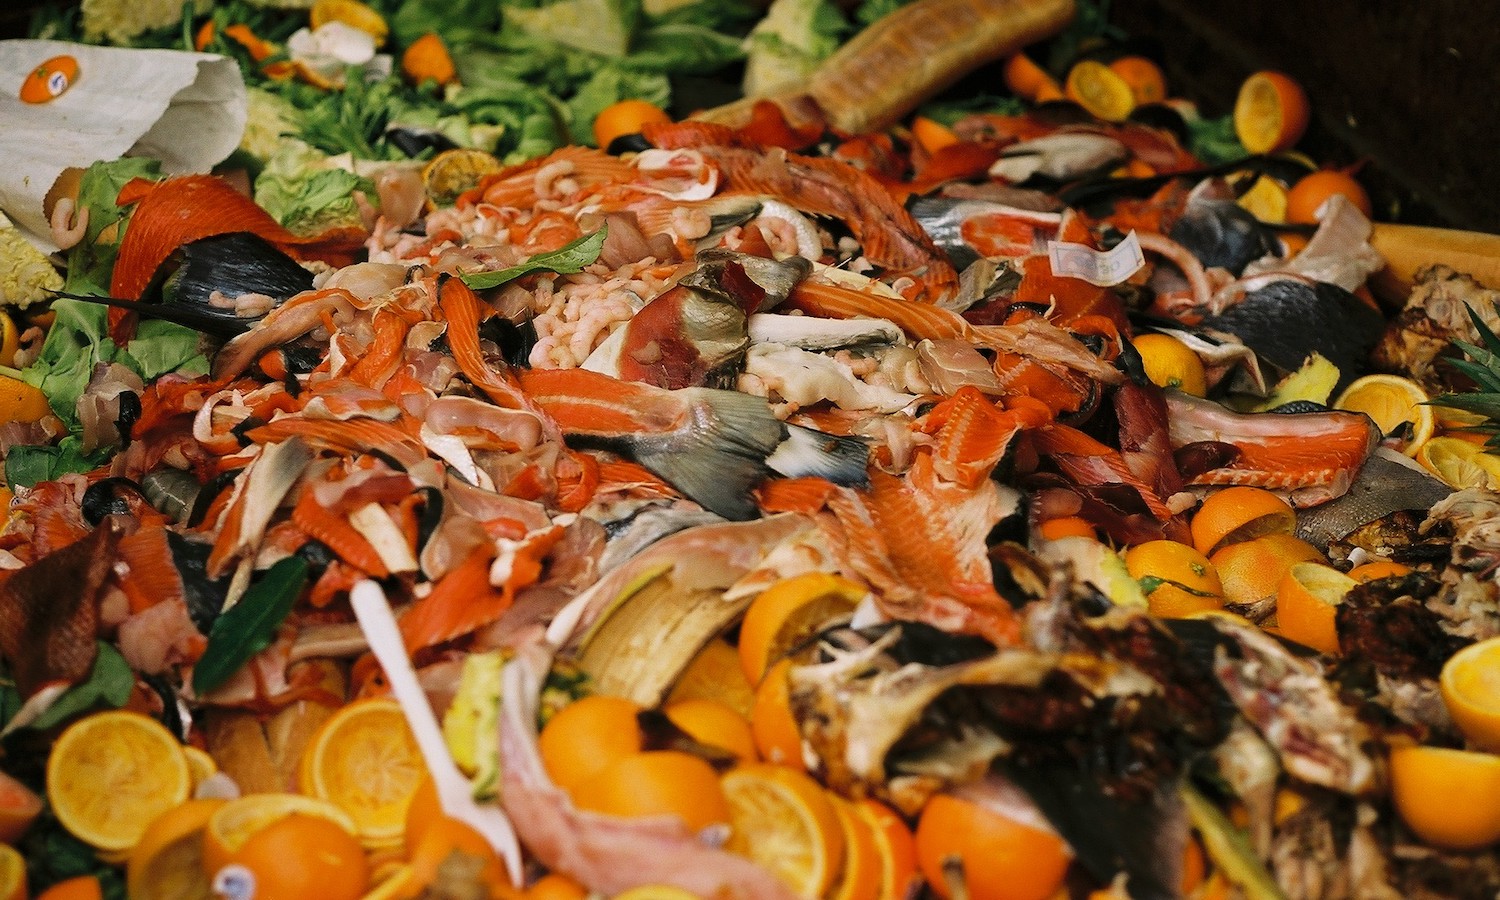 New Food Waste Data Is Out. What Do the Numbers Mean for Our Food System?